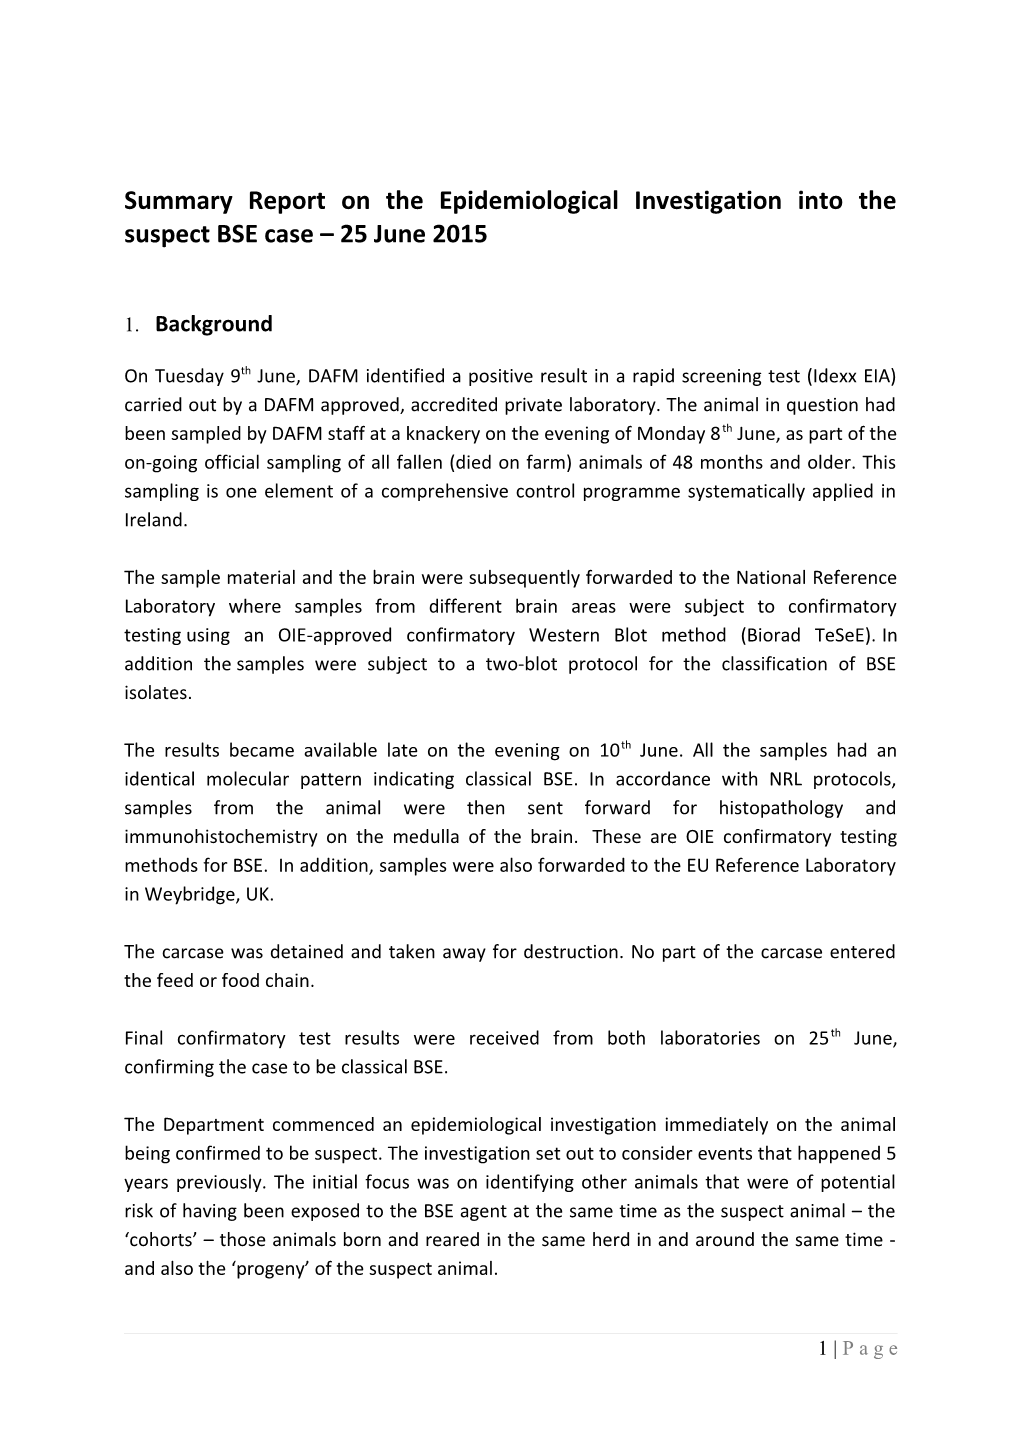 Summary Report on the Epidemiological Investigation Into the Suspect BSE Case 25 June 2015